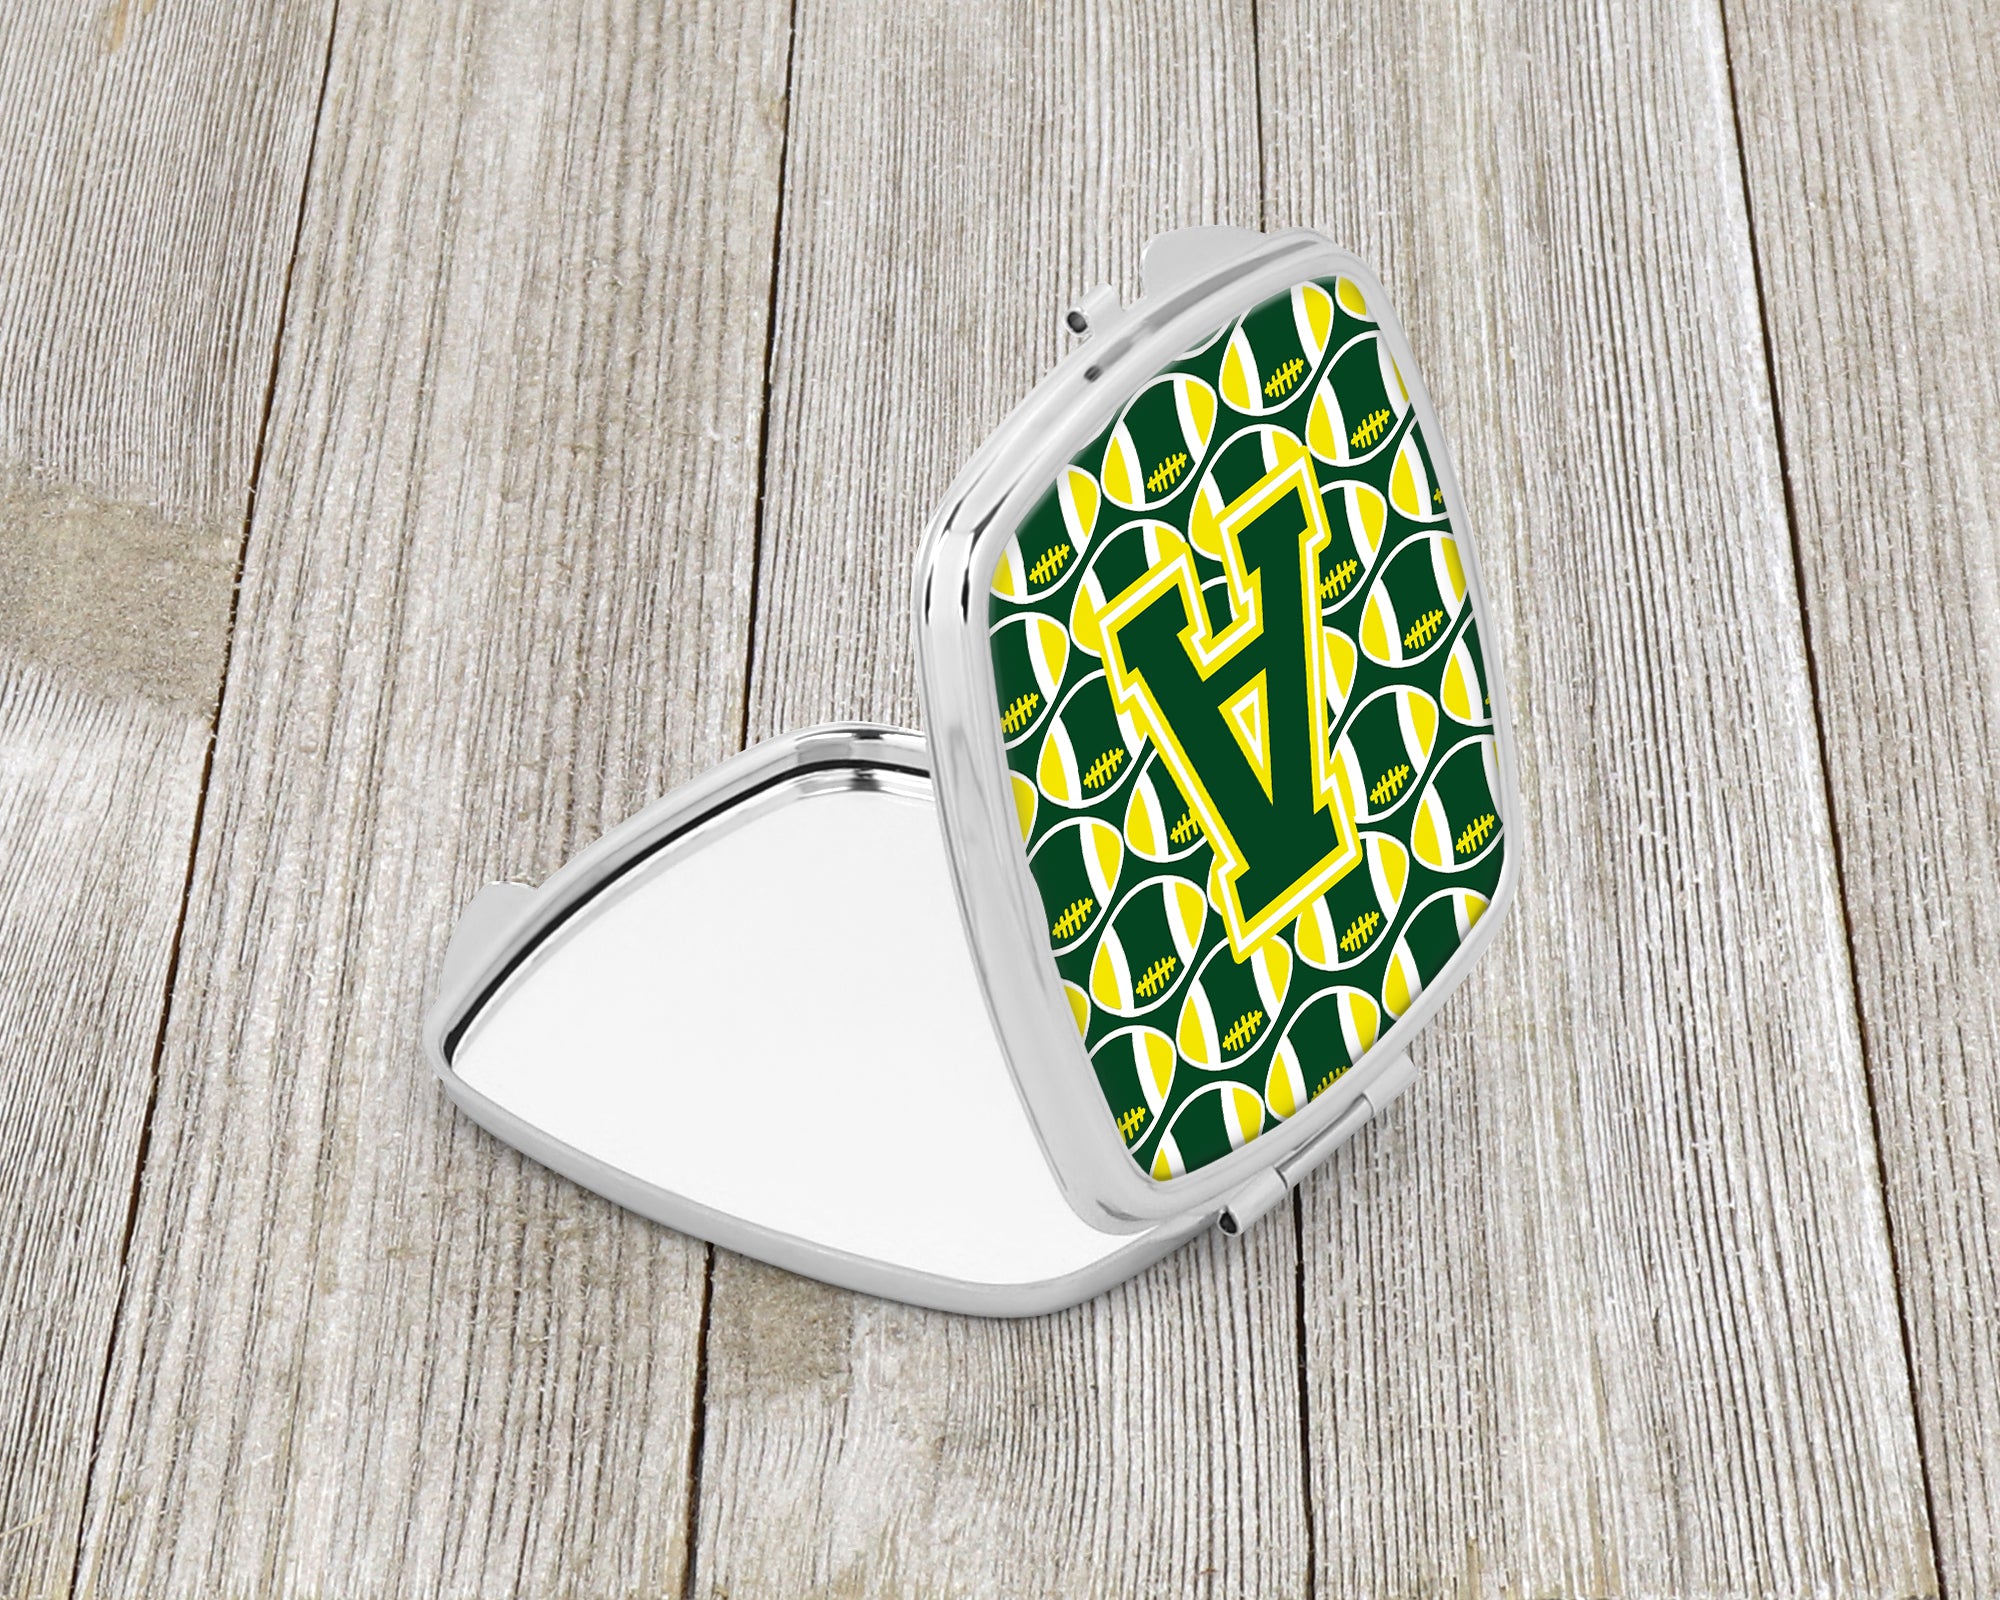 Letter A Football Green and Yellow Compact Mirror CJ1075-ASCM